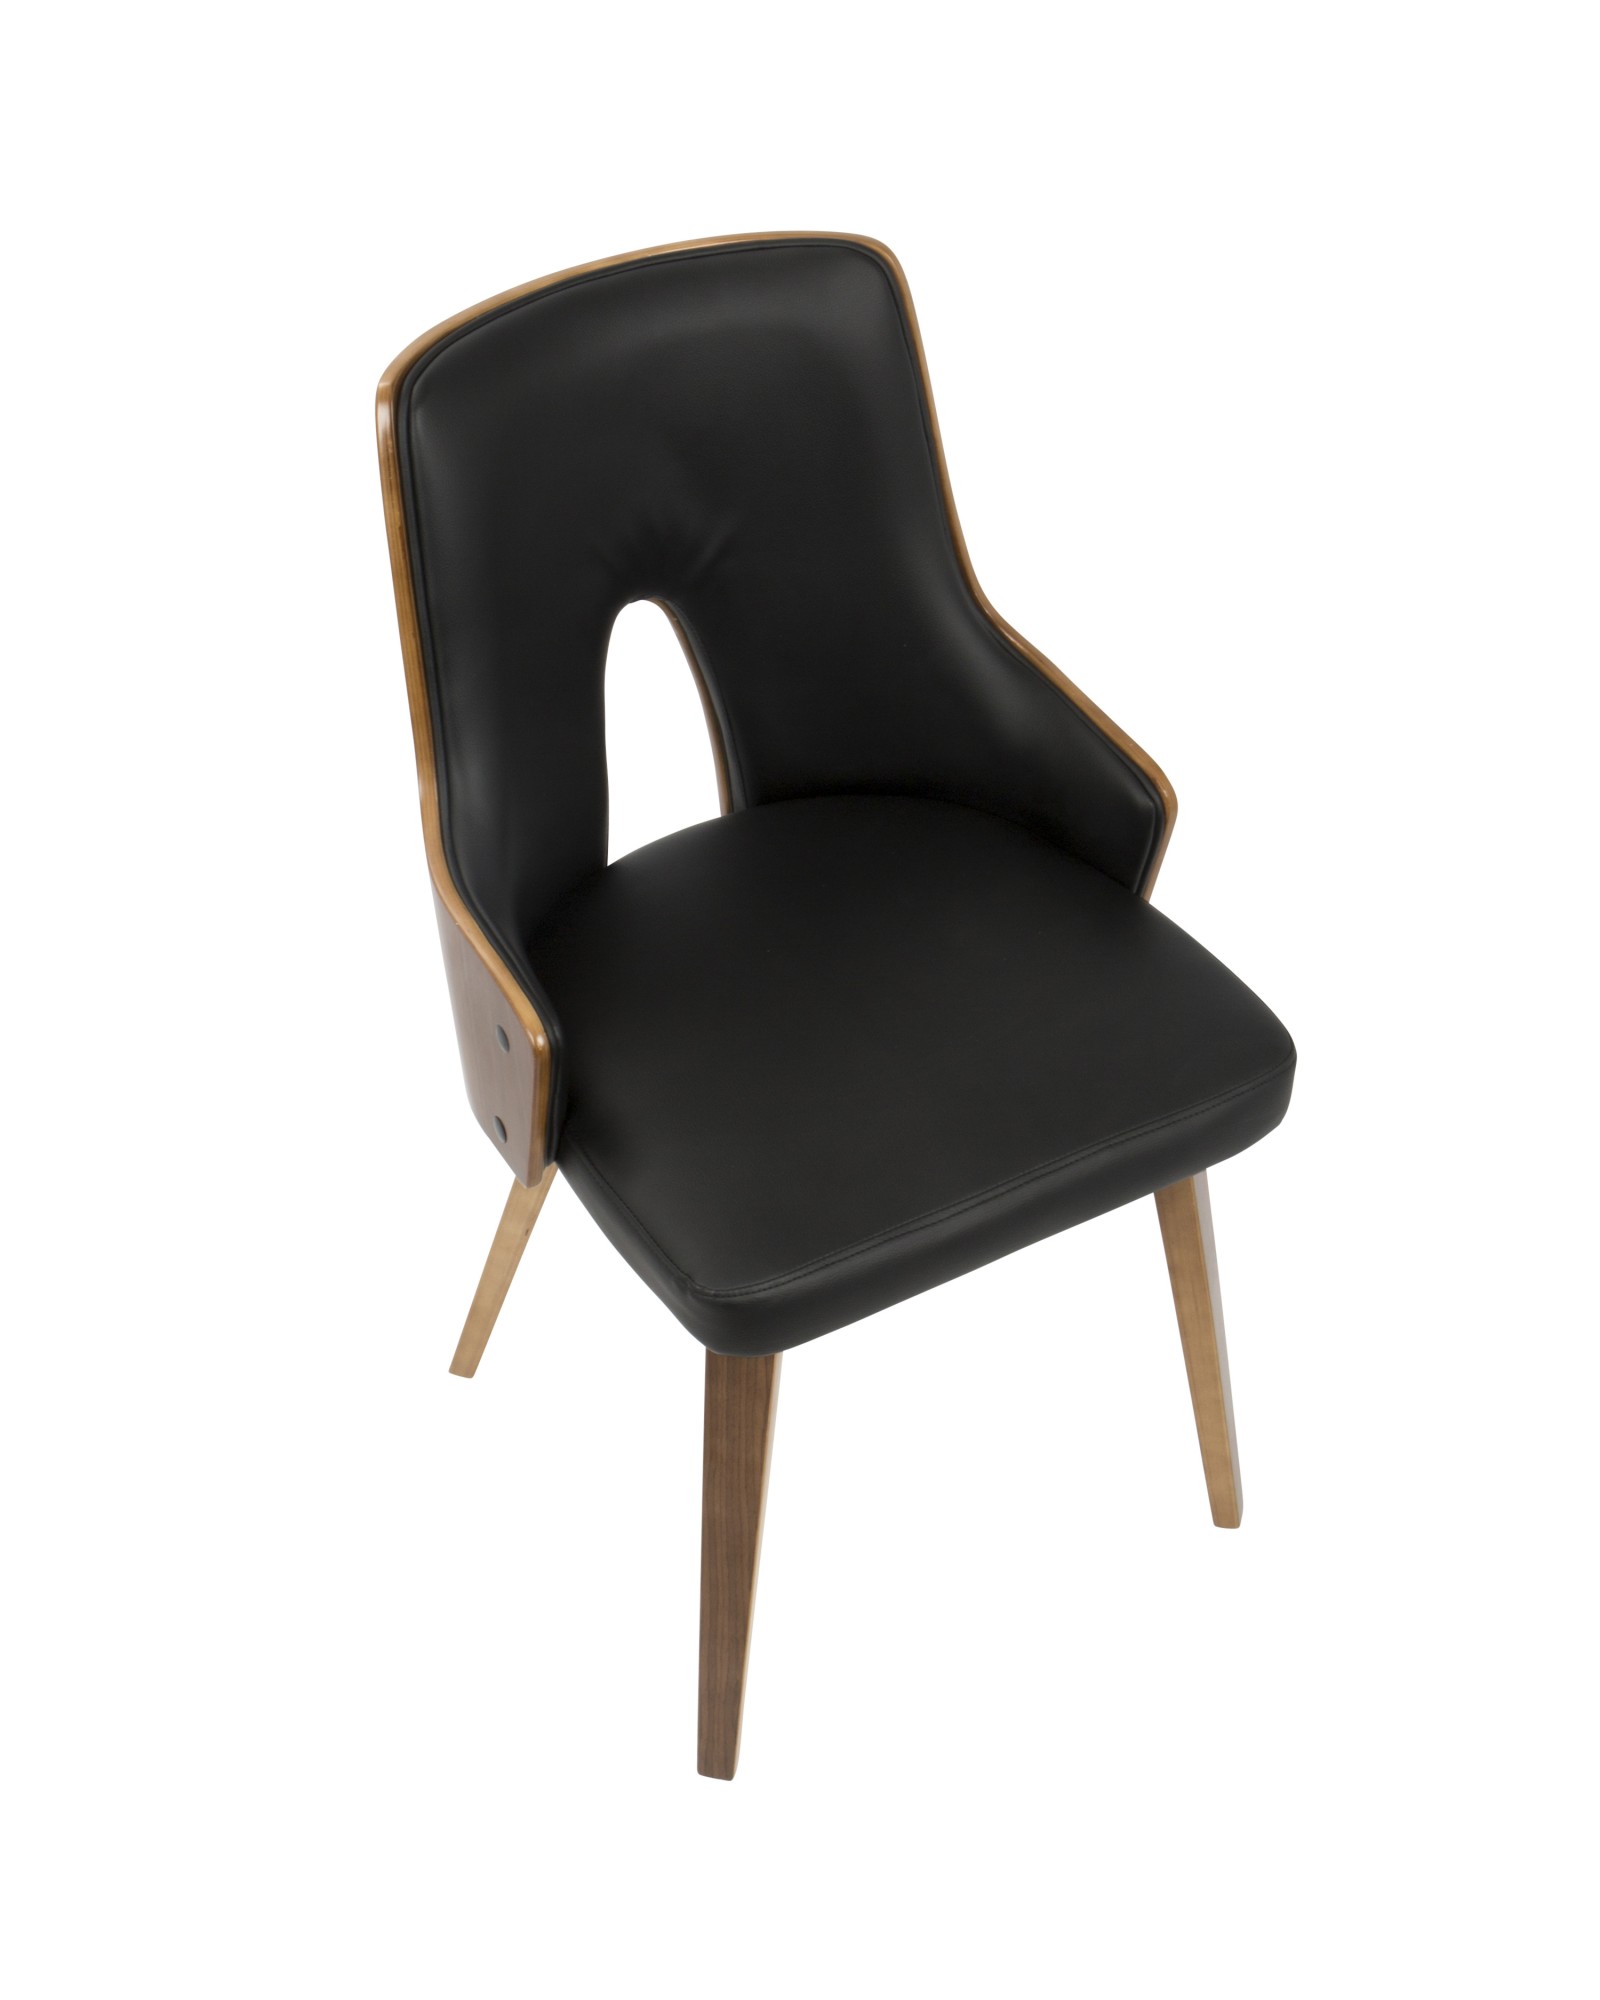 Stella Mid-Century Modern Dining/Accent Chair in Walnut with Black Faux Leather - Set of 2